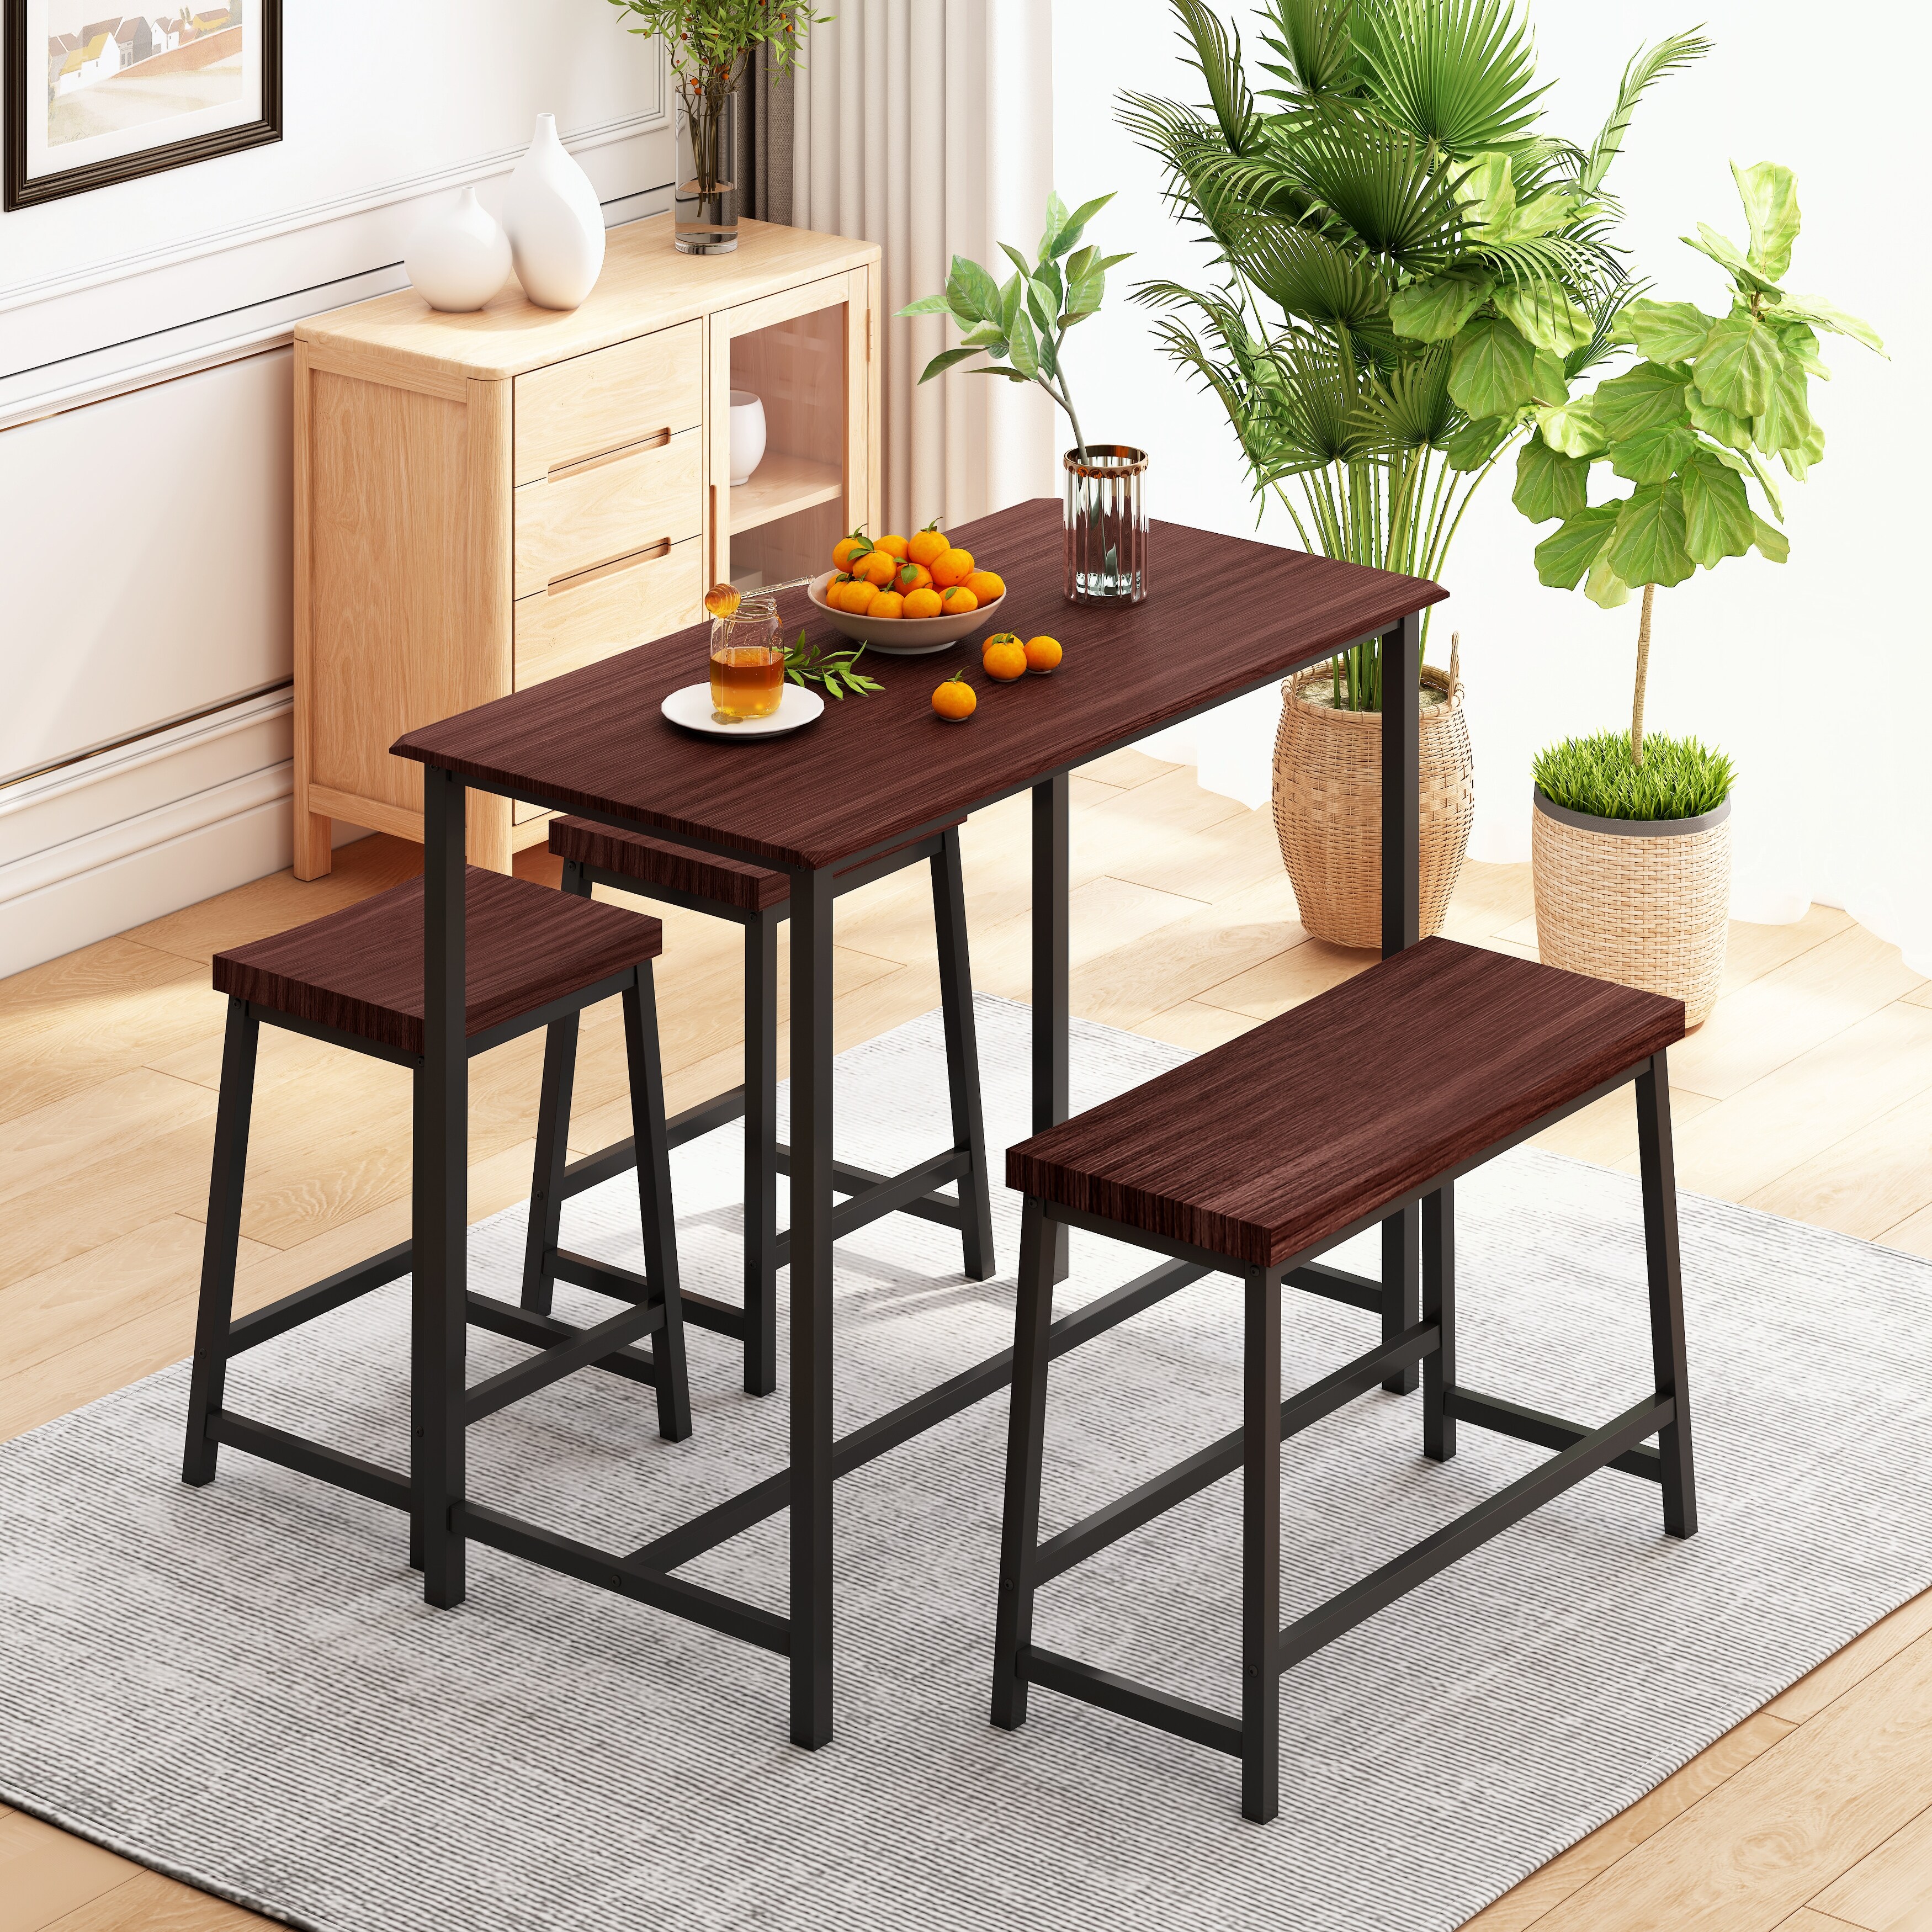 4-Piece Dining Table Set with 2 Stoolsand 1 Bench